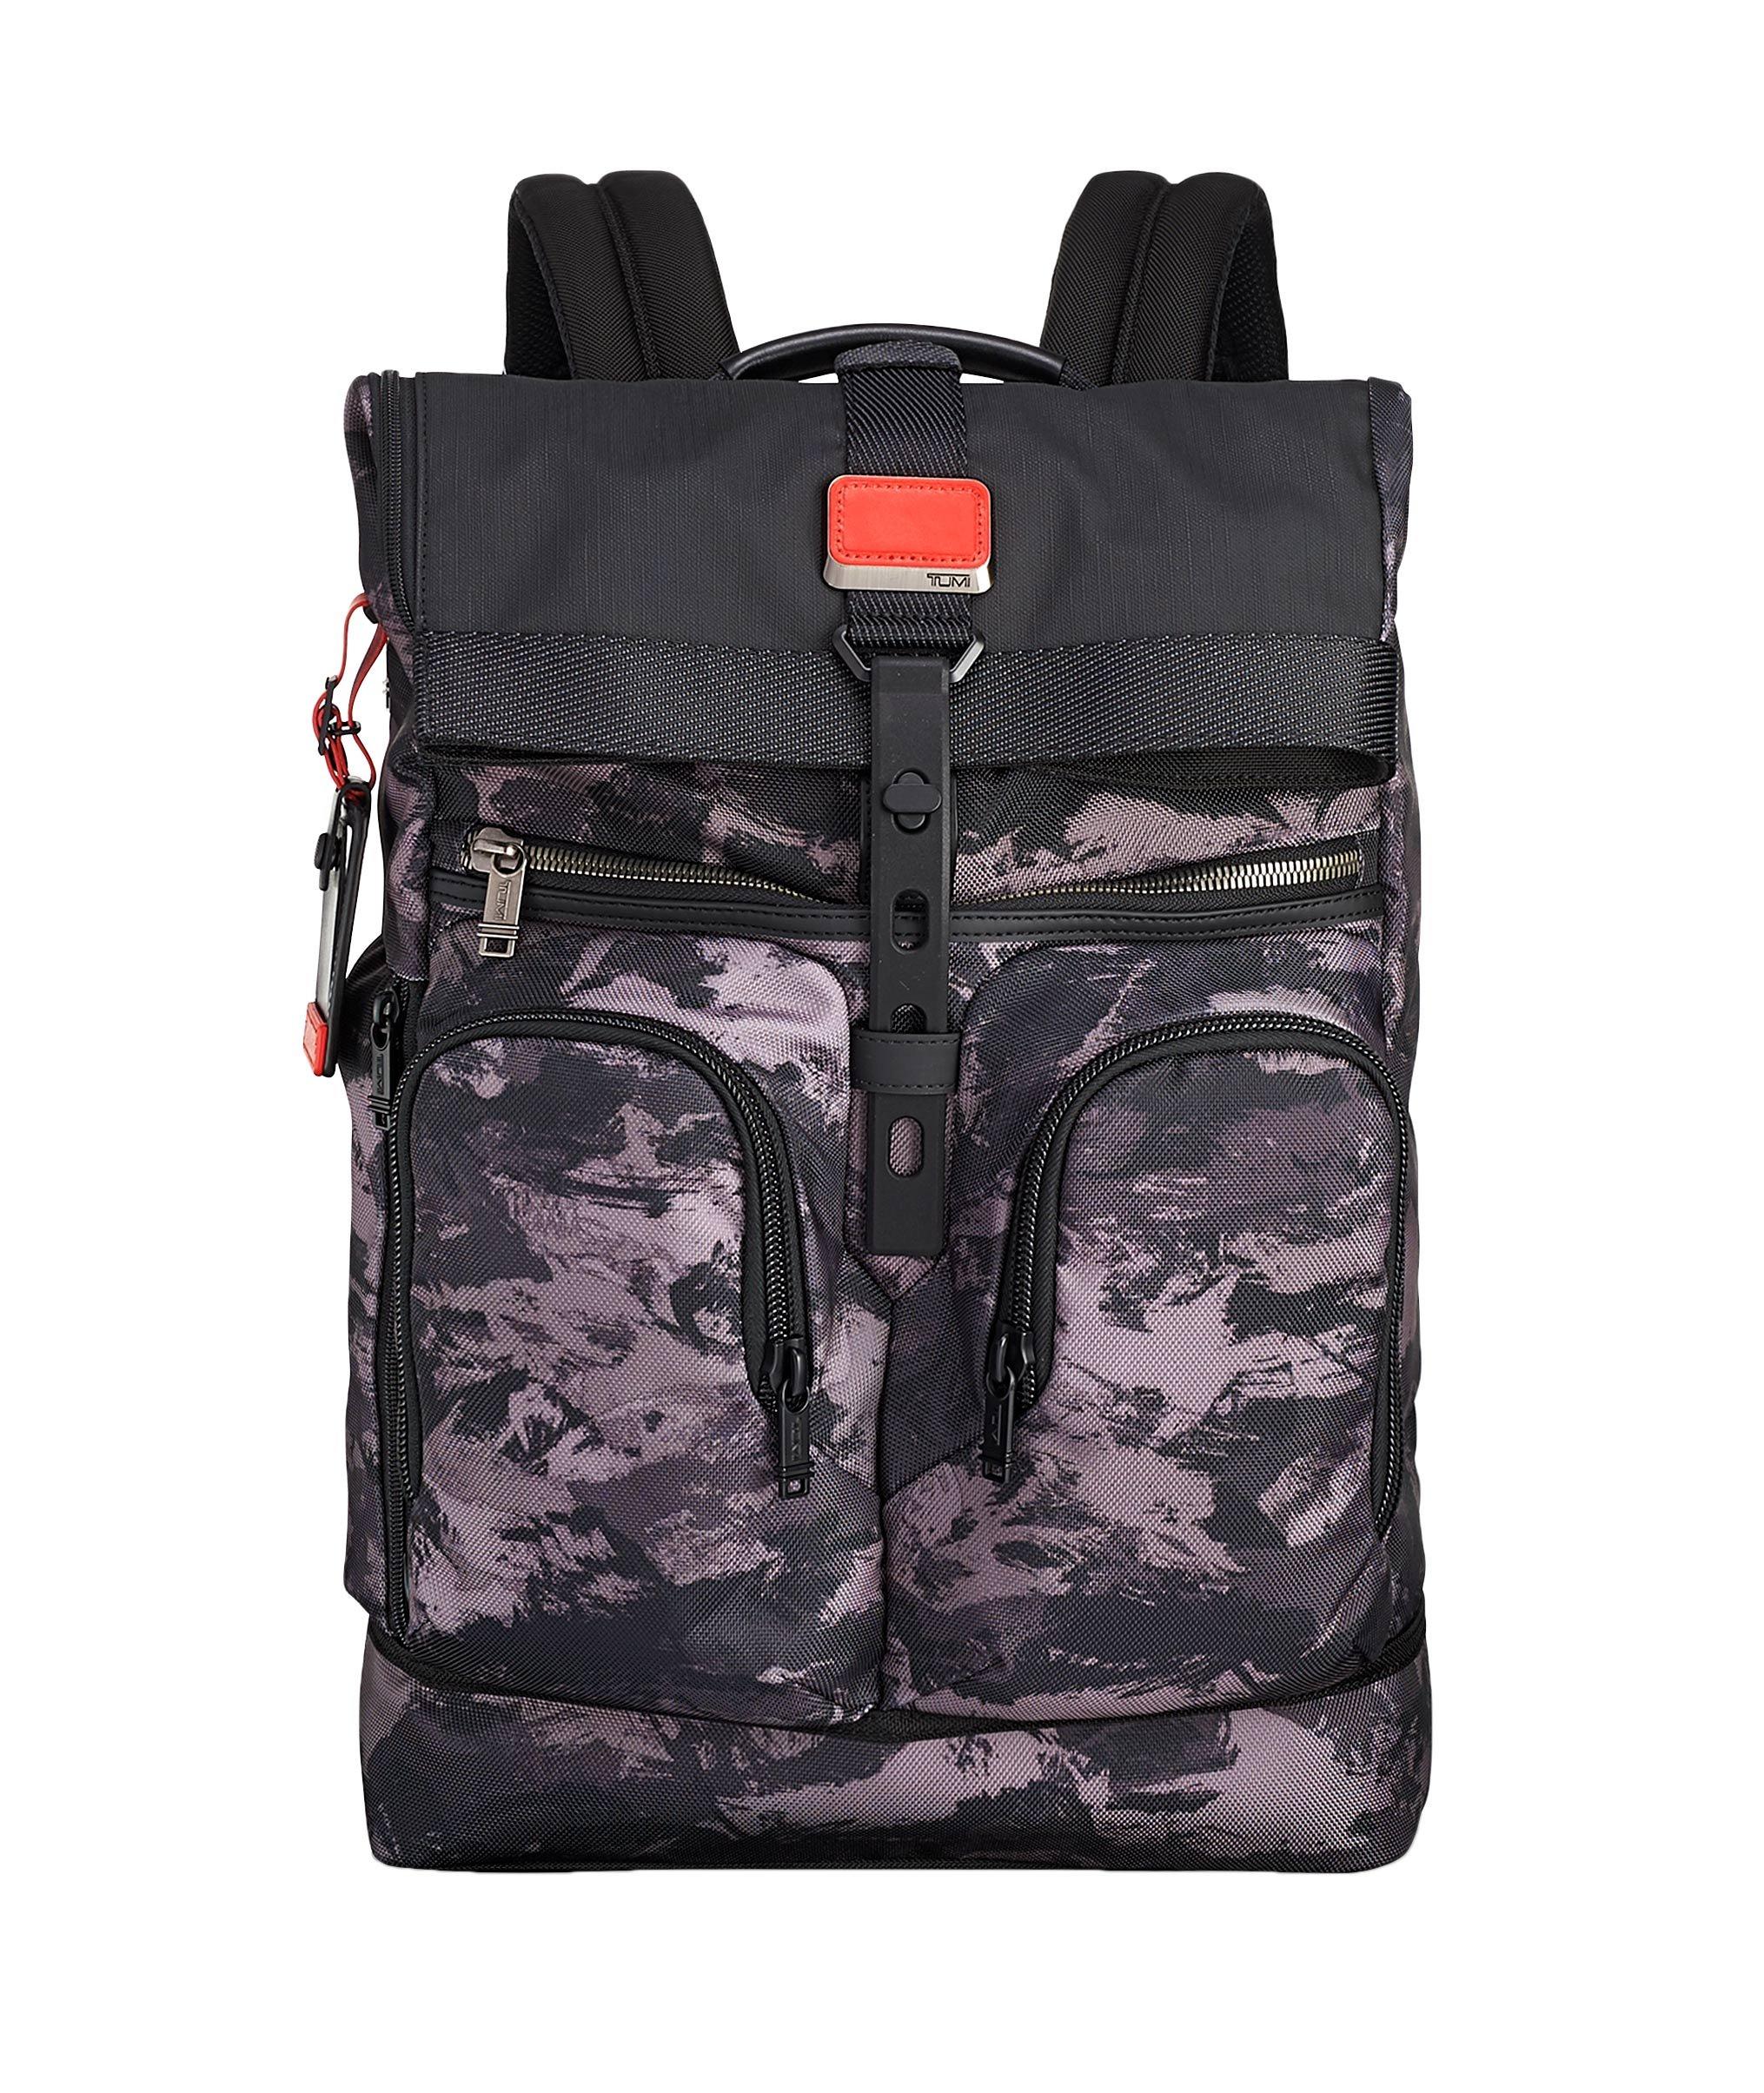  London Roll Top Backpack image 0